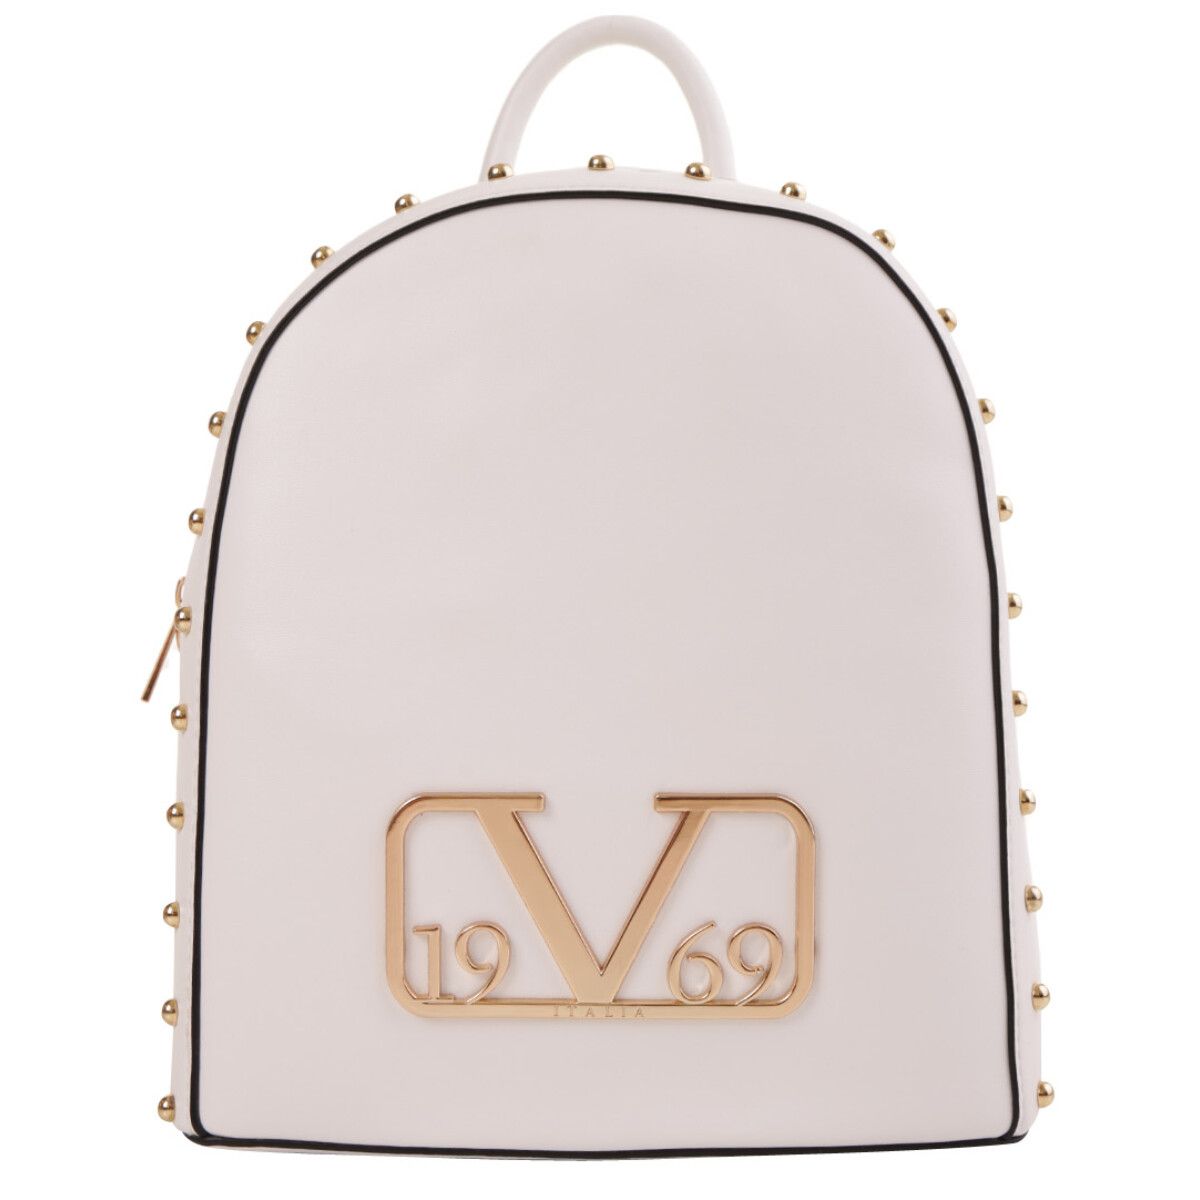 Brand: 19v69 Italia Gender: Women Type: Bags Season: Fall/Winter  PRODUCT DETAIL • Color: white • Fastening: with zip • Pockets: inside pockets • Size (cm): 30x23x11 • Details: -rucksack  •  Article code: VI20AI0025  COMPOSITION AND MATERIAL • Composition: -100% polyester. gender:womens